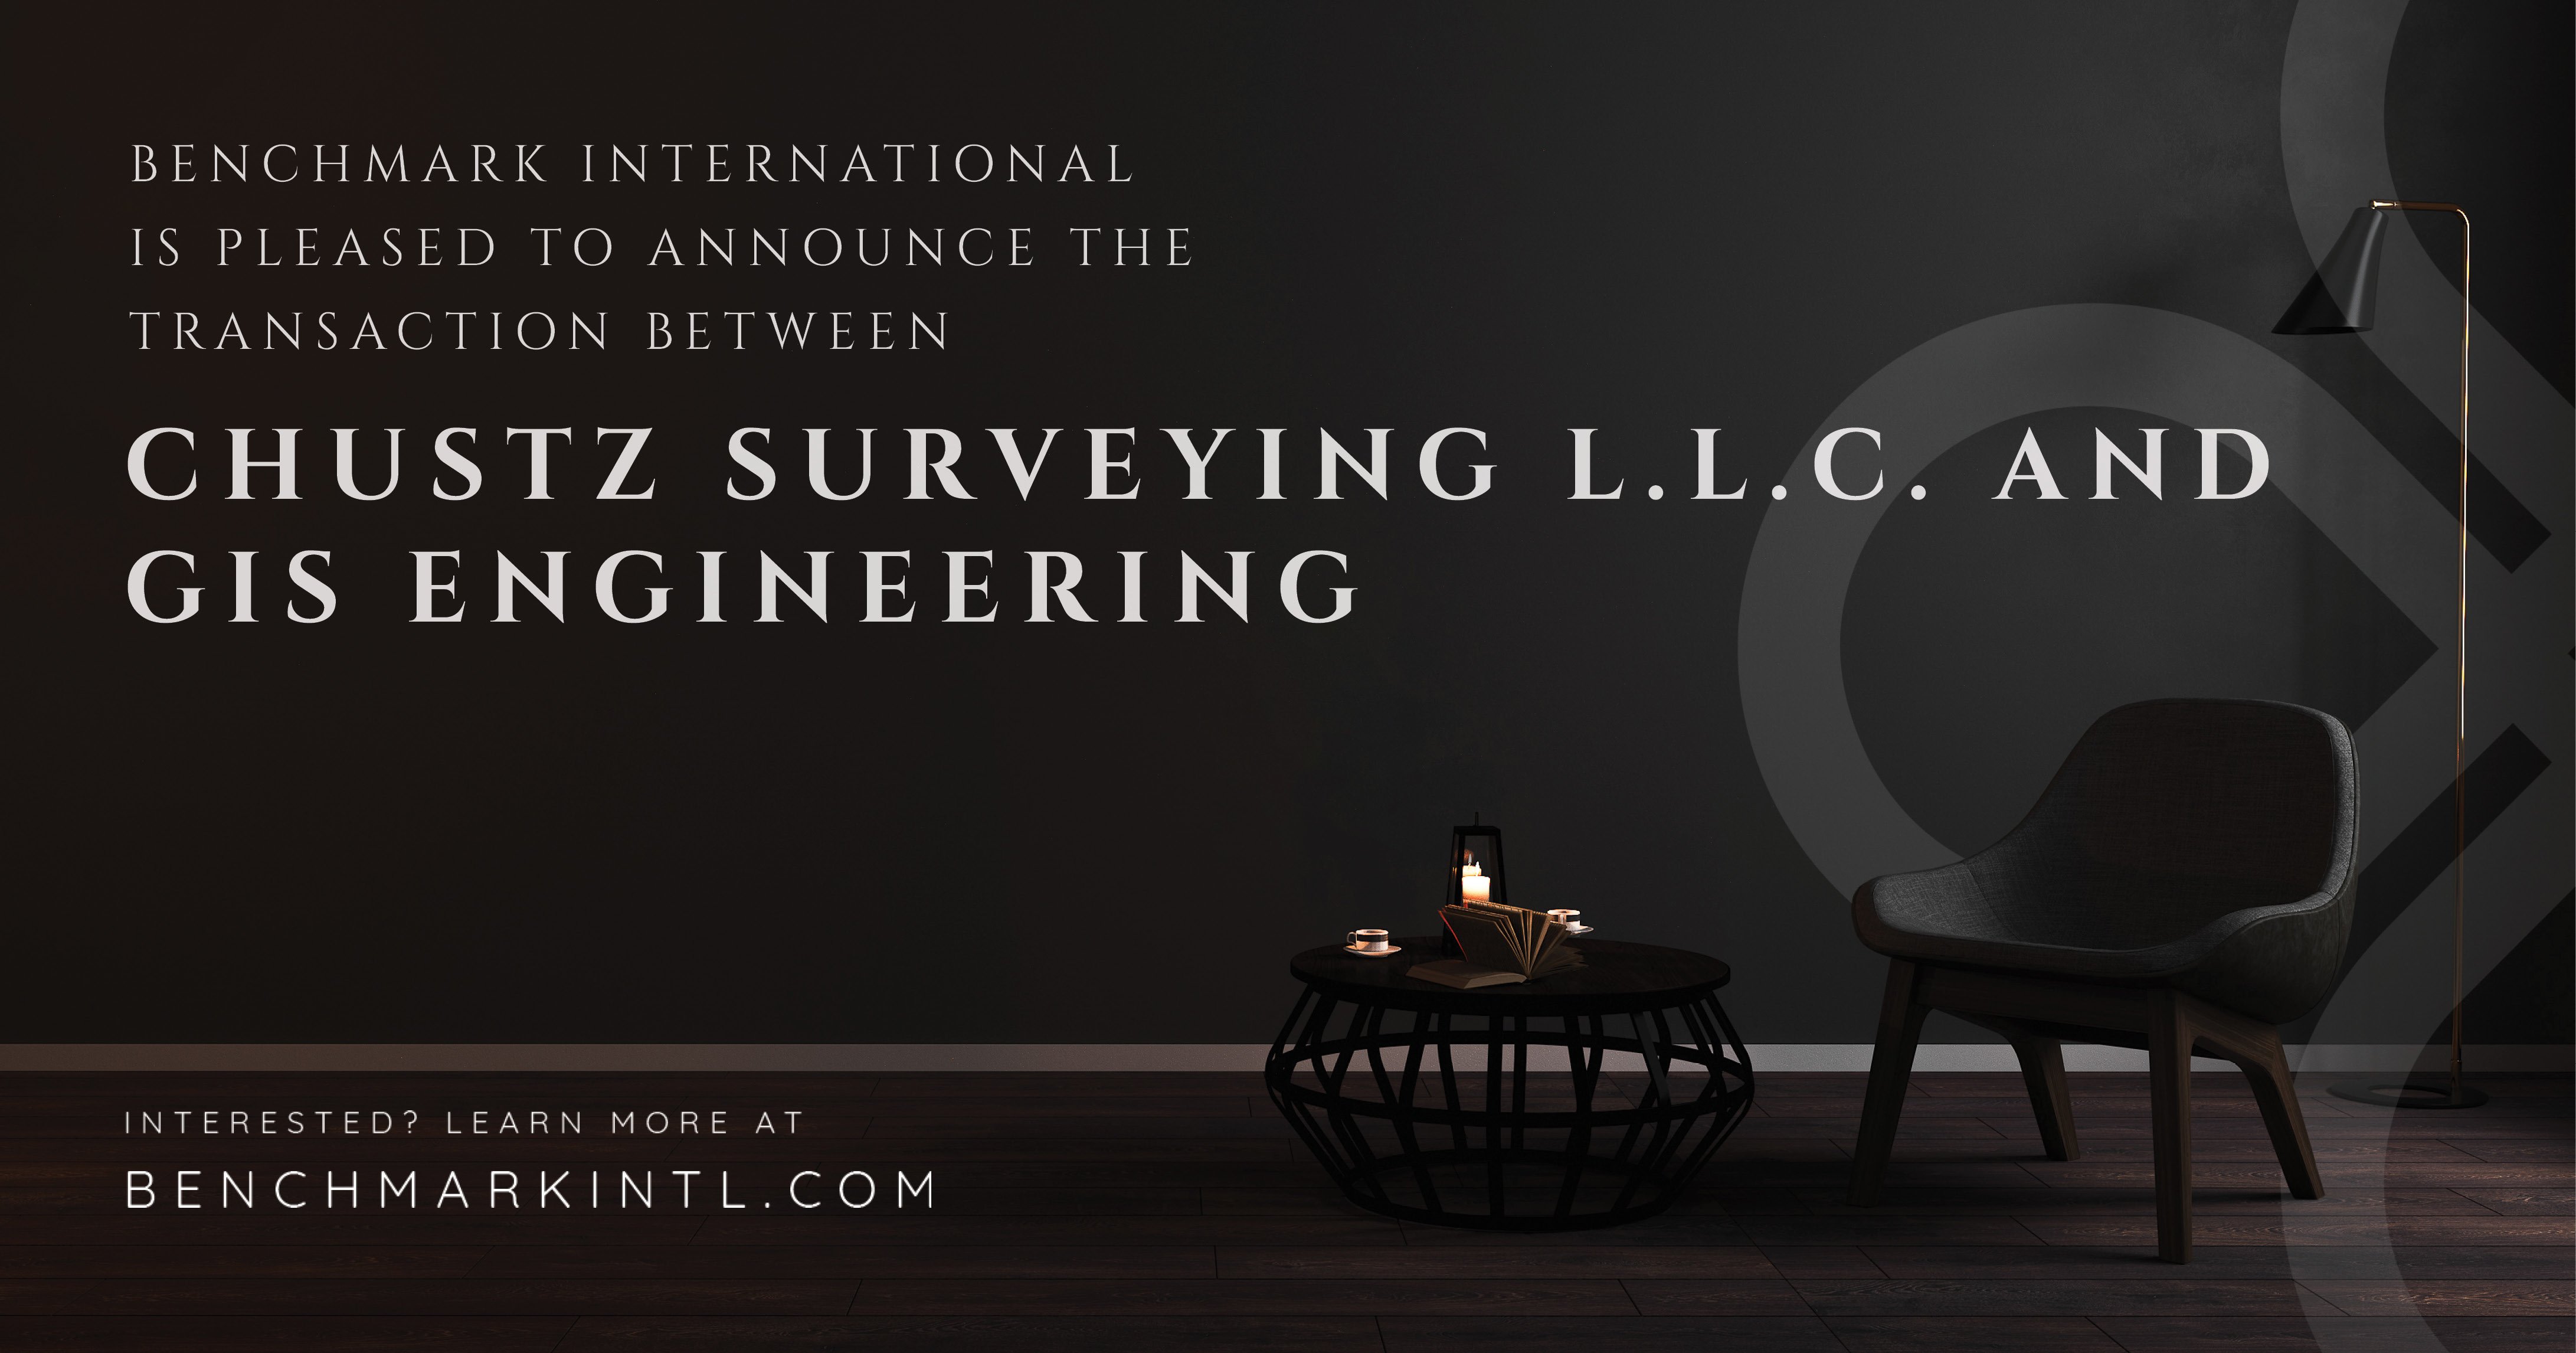 ­­Benchmark International Is Pleased To Announce The Transaction Of Chustz Surveying, L.L.C. And GIS Engineering